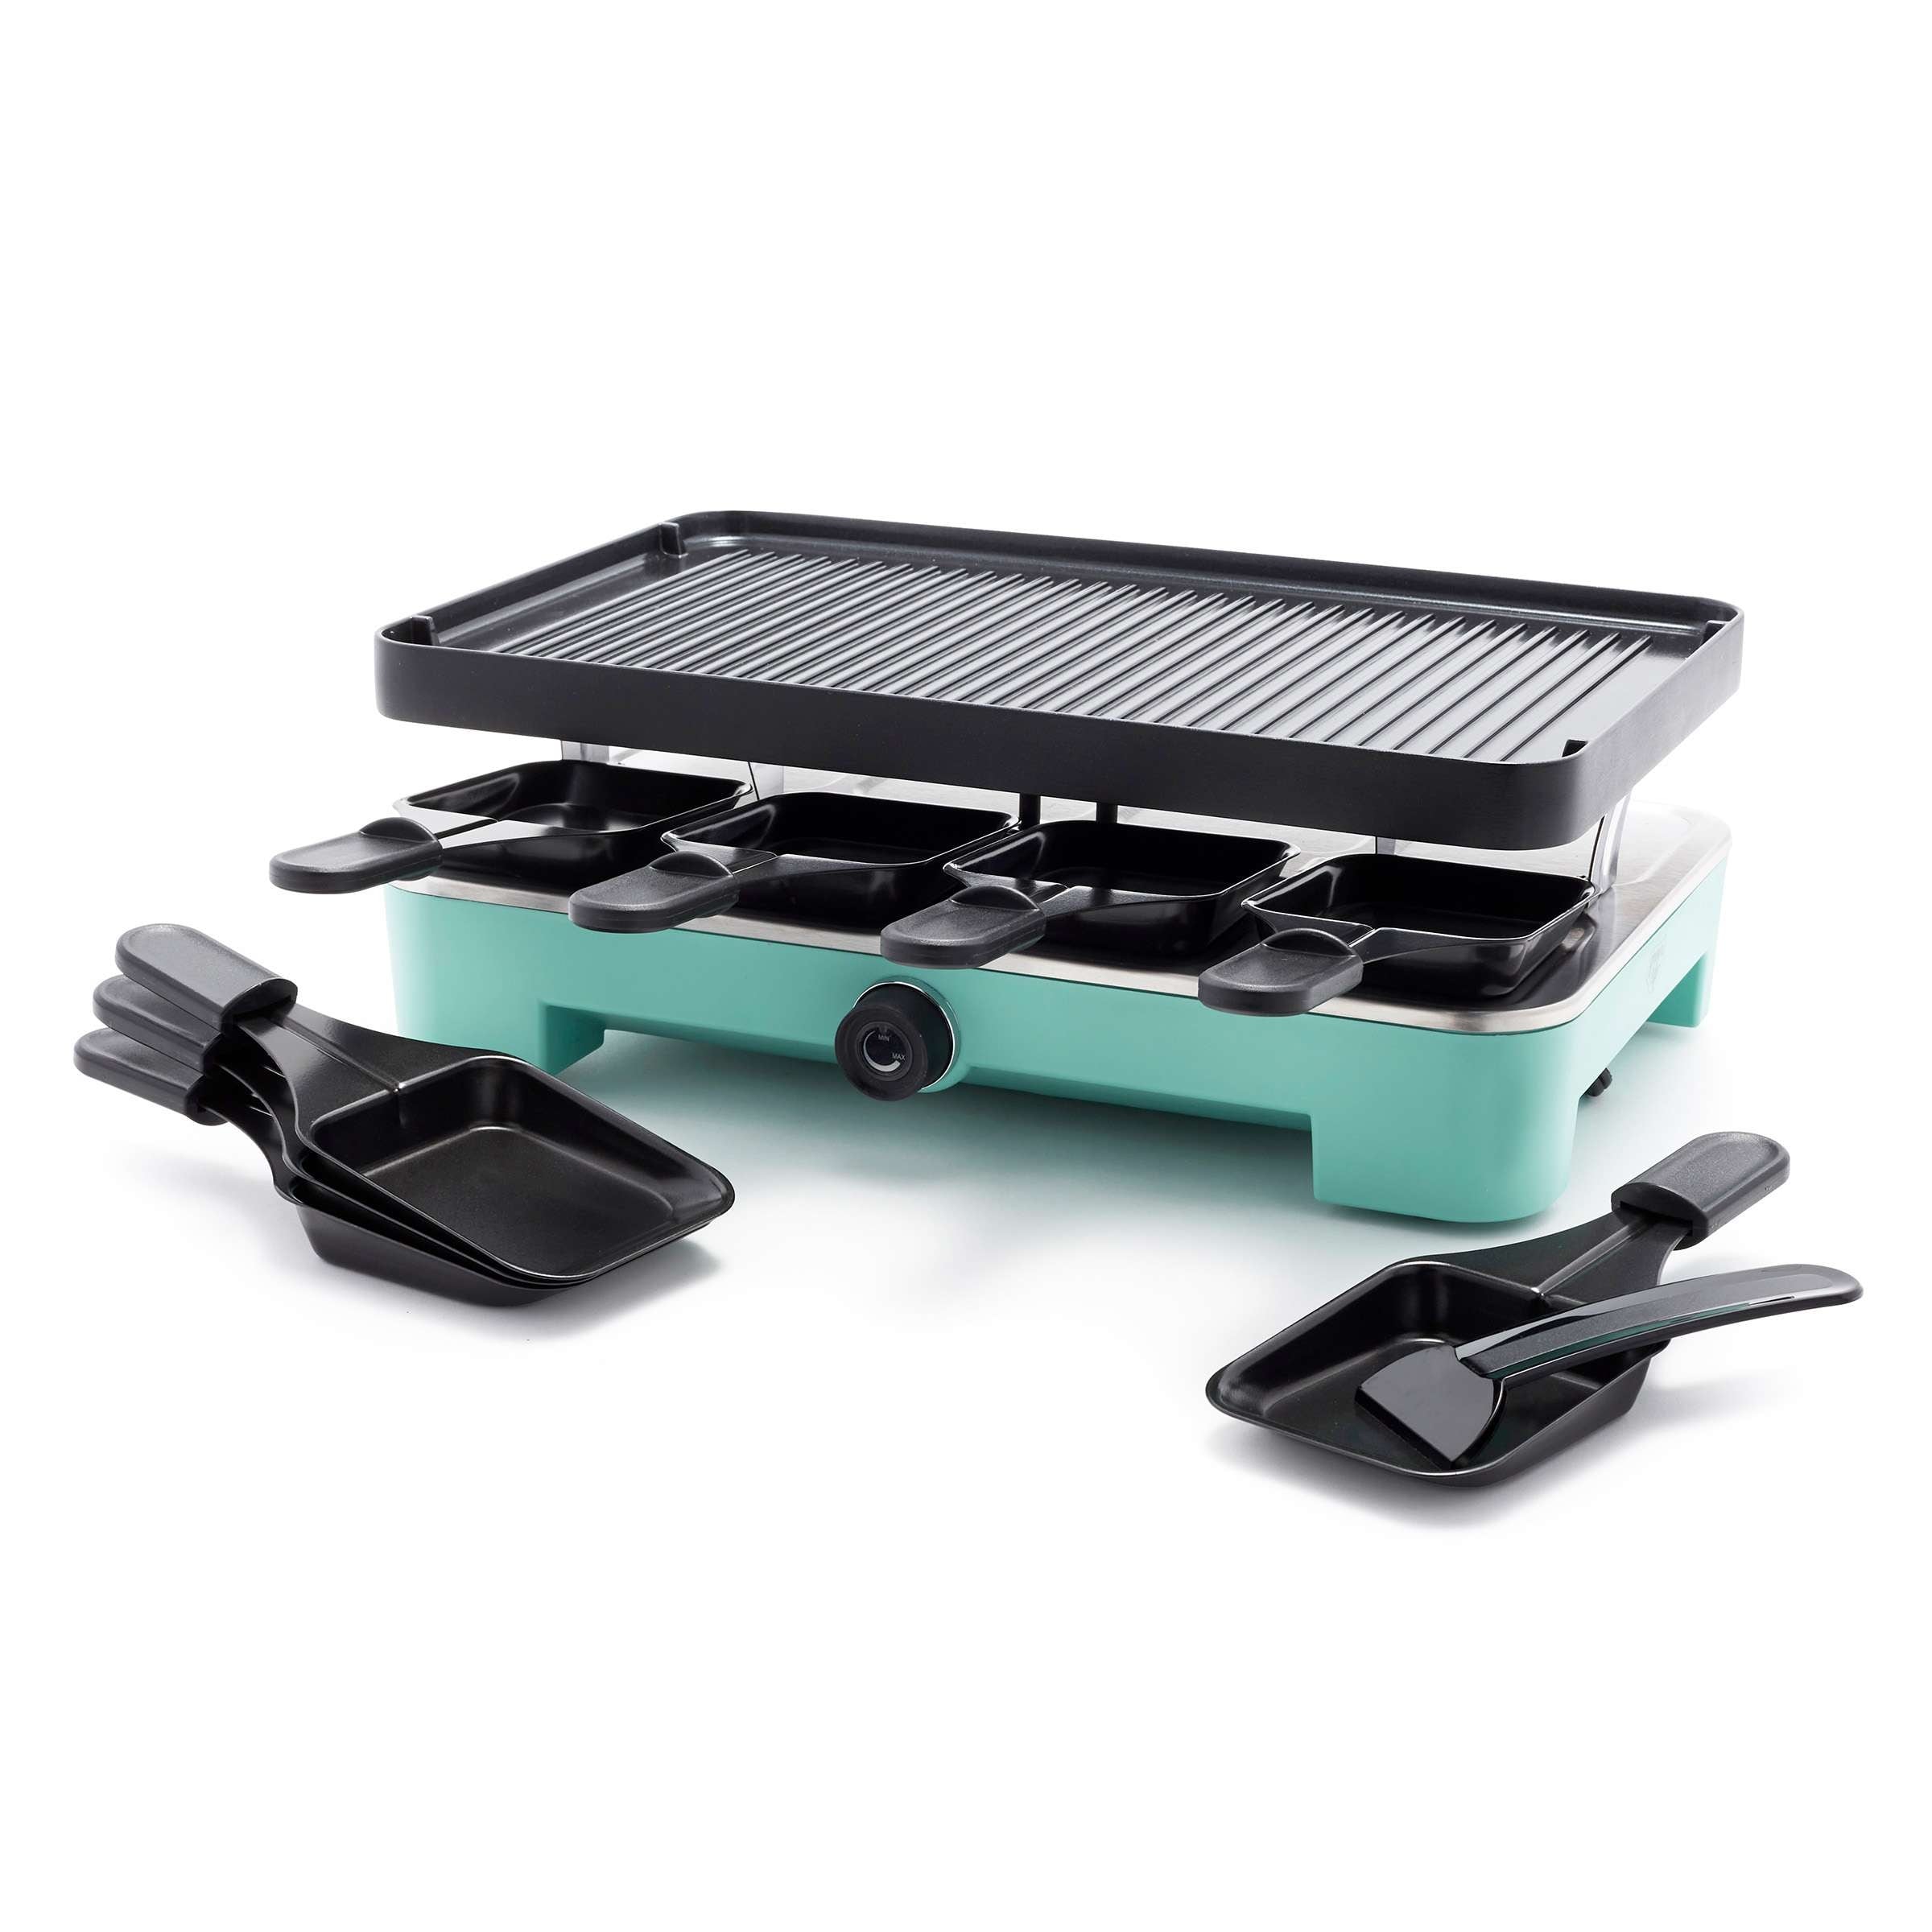 GreenLife Raclette Indoor Tabletop Grill, 2-in-1 Grill and Griddle - On  Sale - Bed Bath & Beyond - 37869025